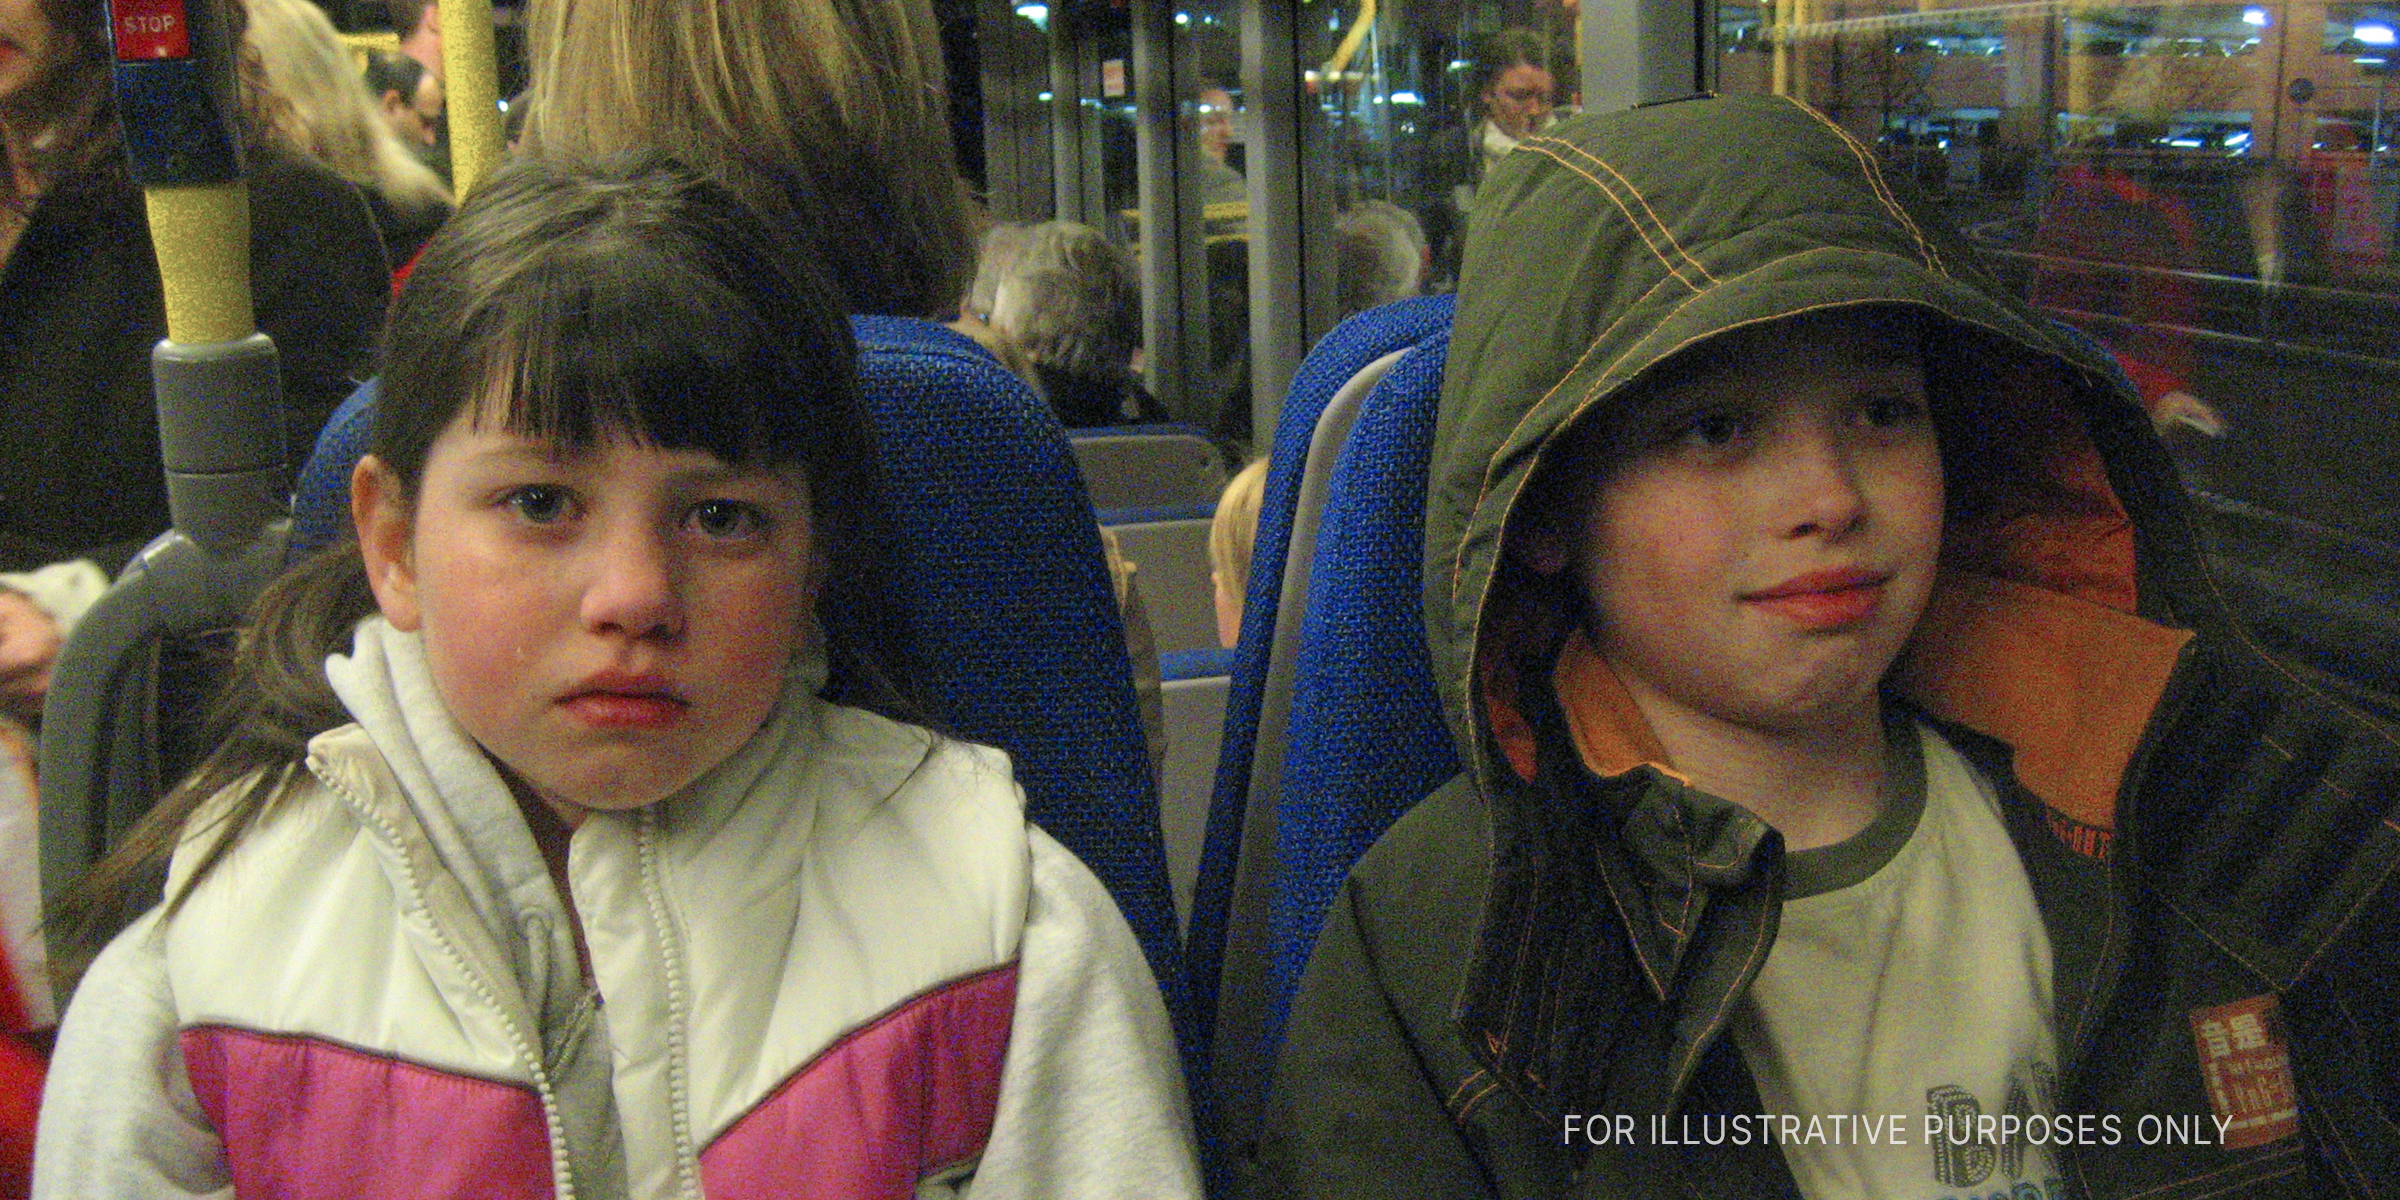 Two children on bus | Source: Flickr